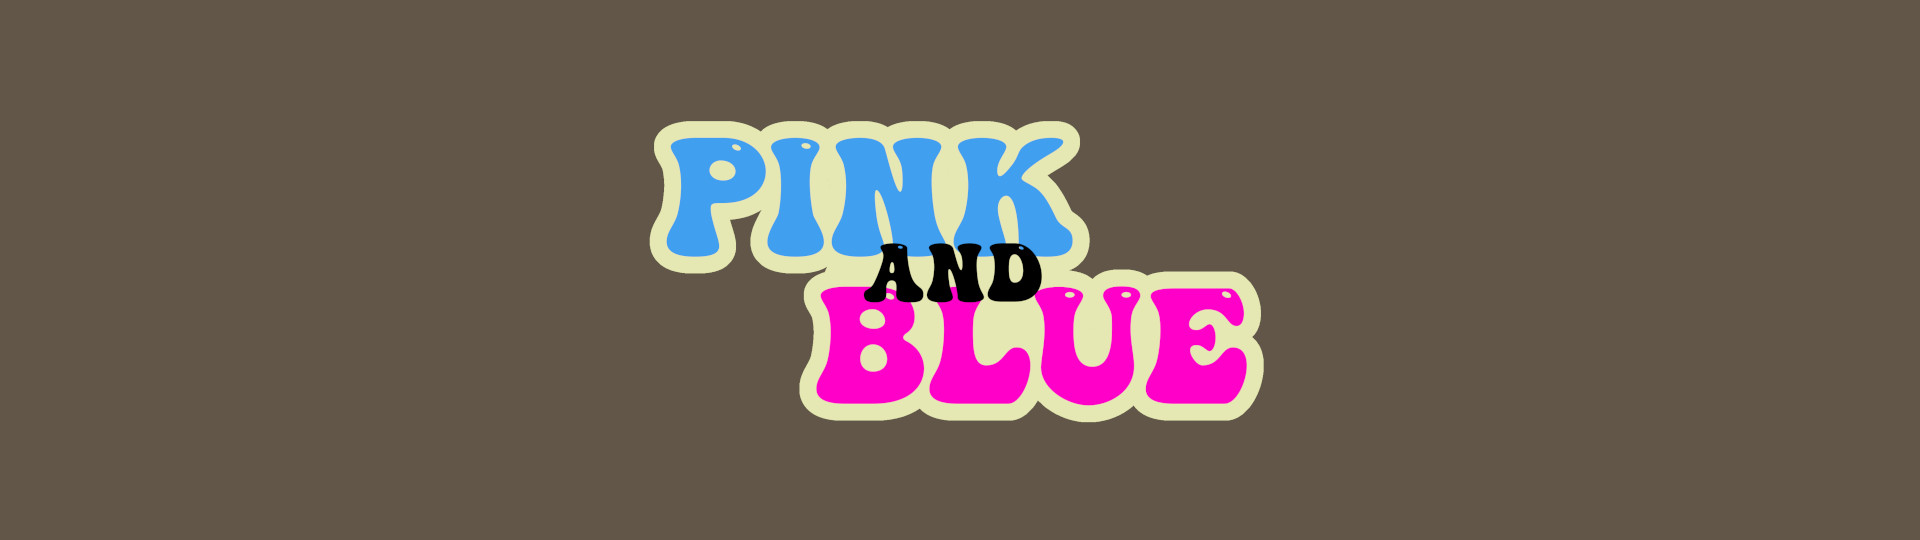 PINK AND BLUE